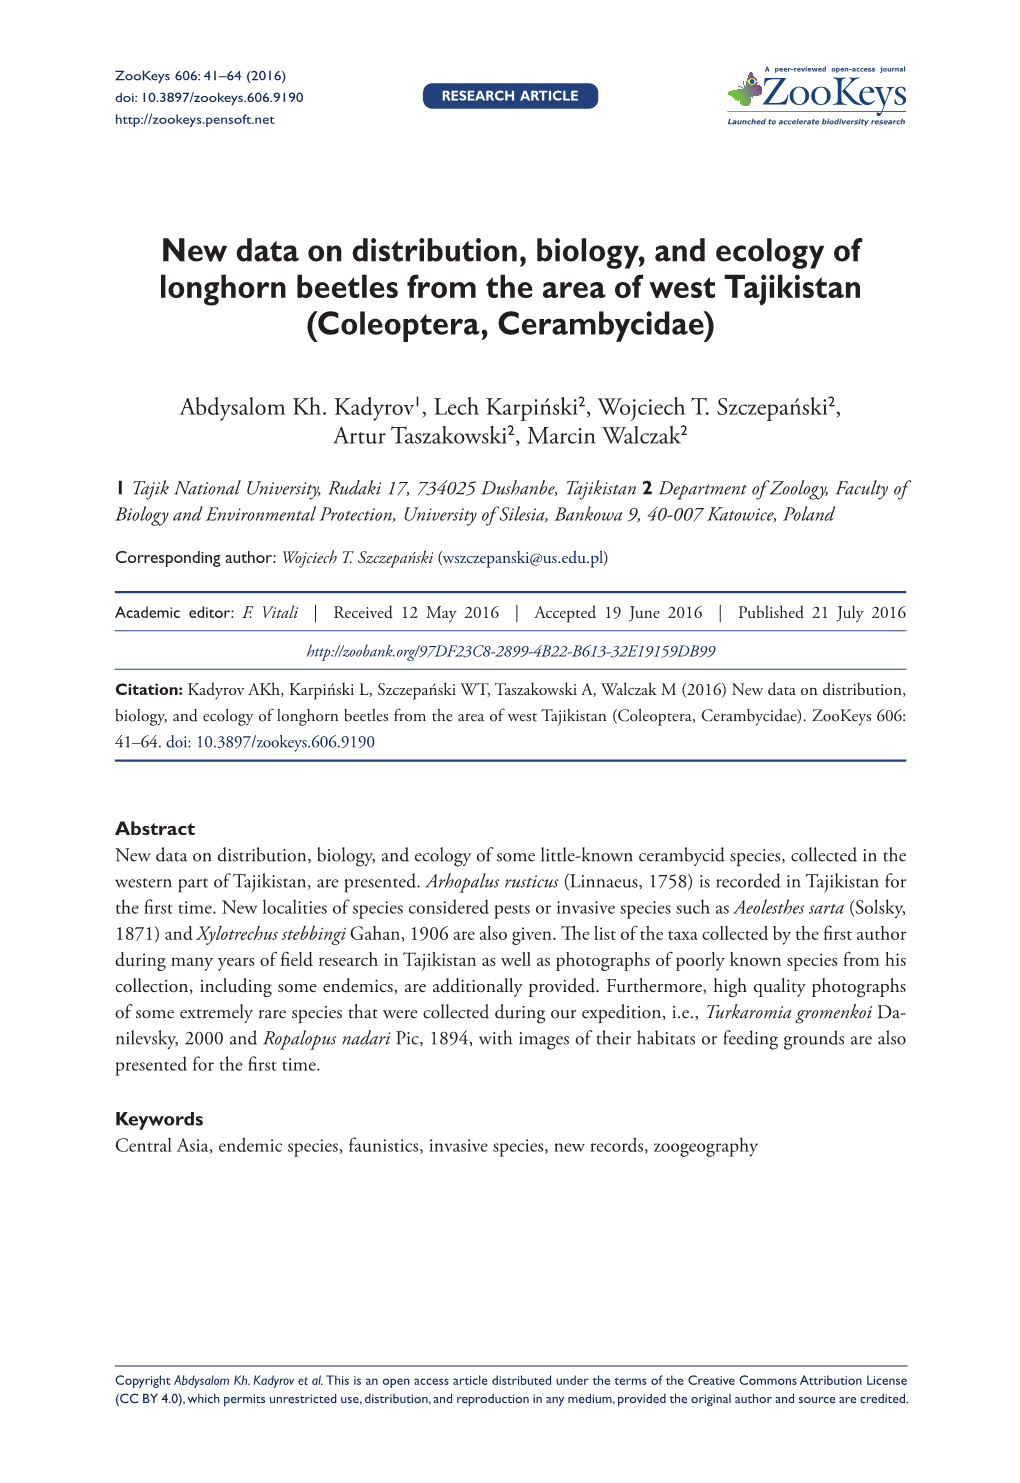 New Data on Distribution, Biology, and Ecology of Longhorn Beetles from the Area of West Tajikistan (Coleoptera, Cerambycidae)